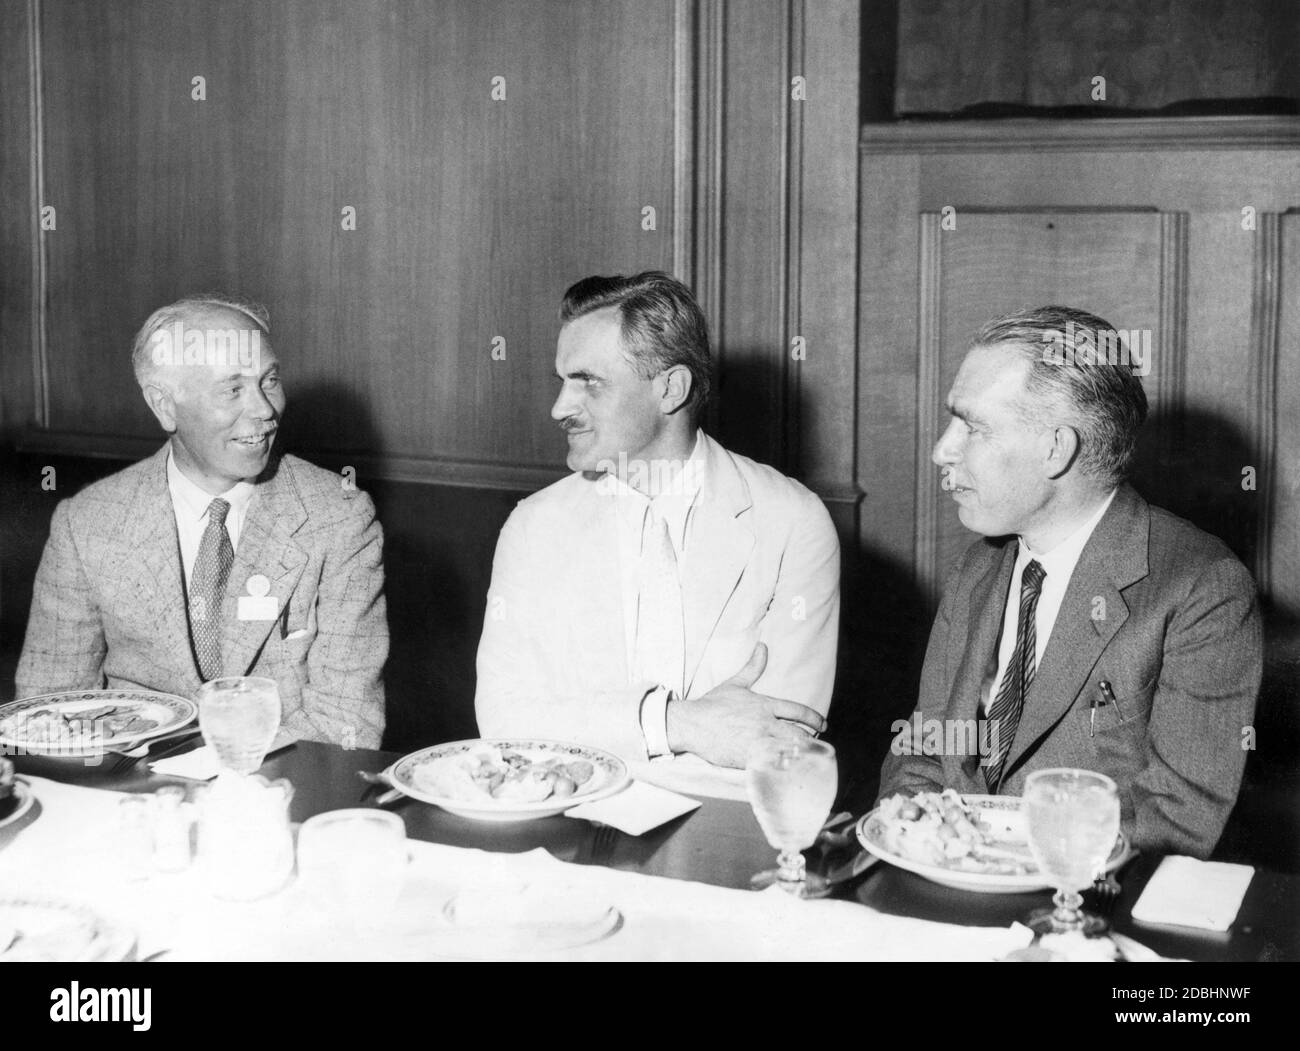 Scientists and Nobel Laureates in conversation on the occasion of the meeting of the American Association for the advancement of Sience in Chicago. From left: S.W. Watson from the University of Cambridge (Great Britain), A.H. Compton from the University of Chicago) and Niels Bohr from the University of Copenhagen. Stock Photo